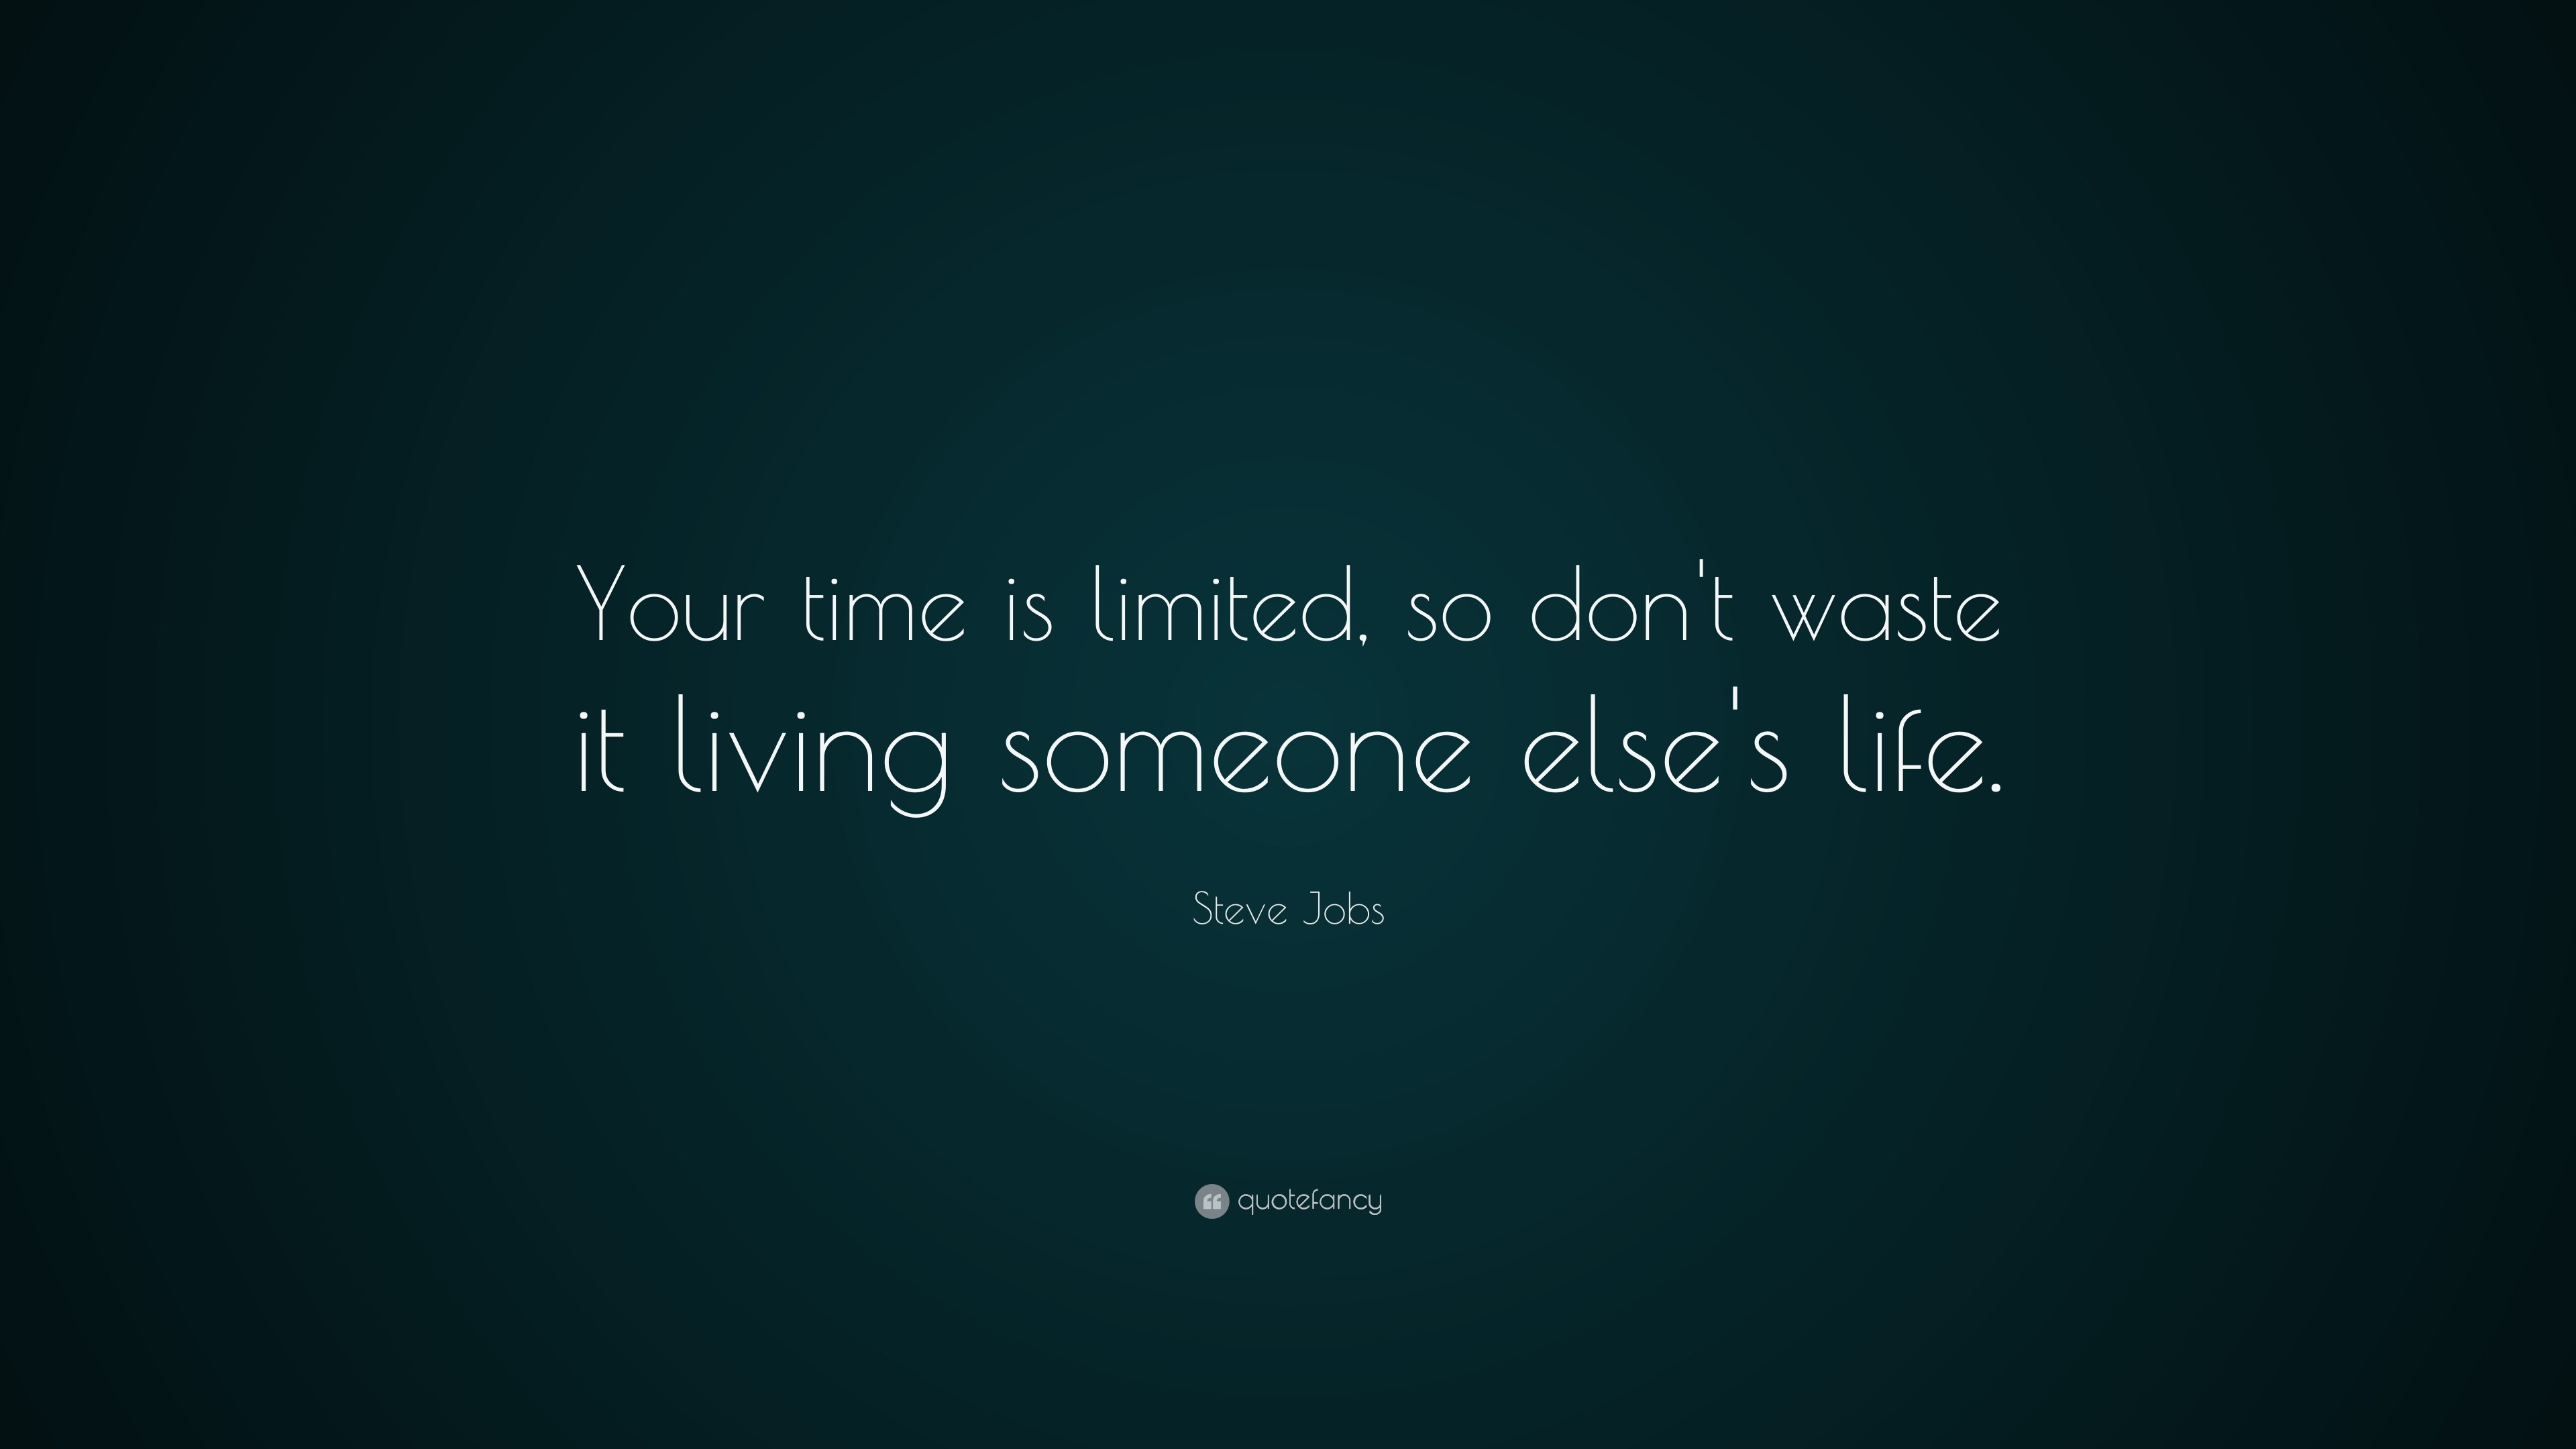 Steve Jobs Quote: “Your Time Is Limited, So Don’t Waste It Living